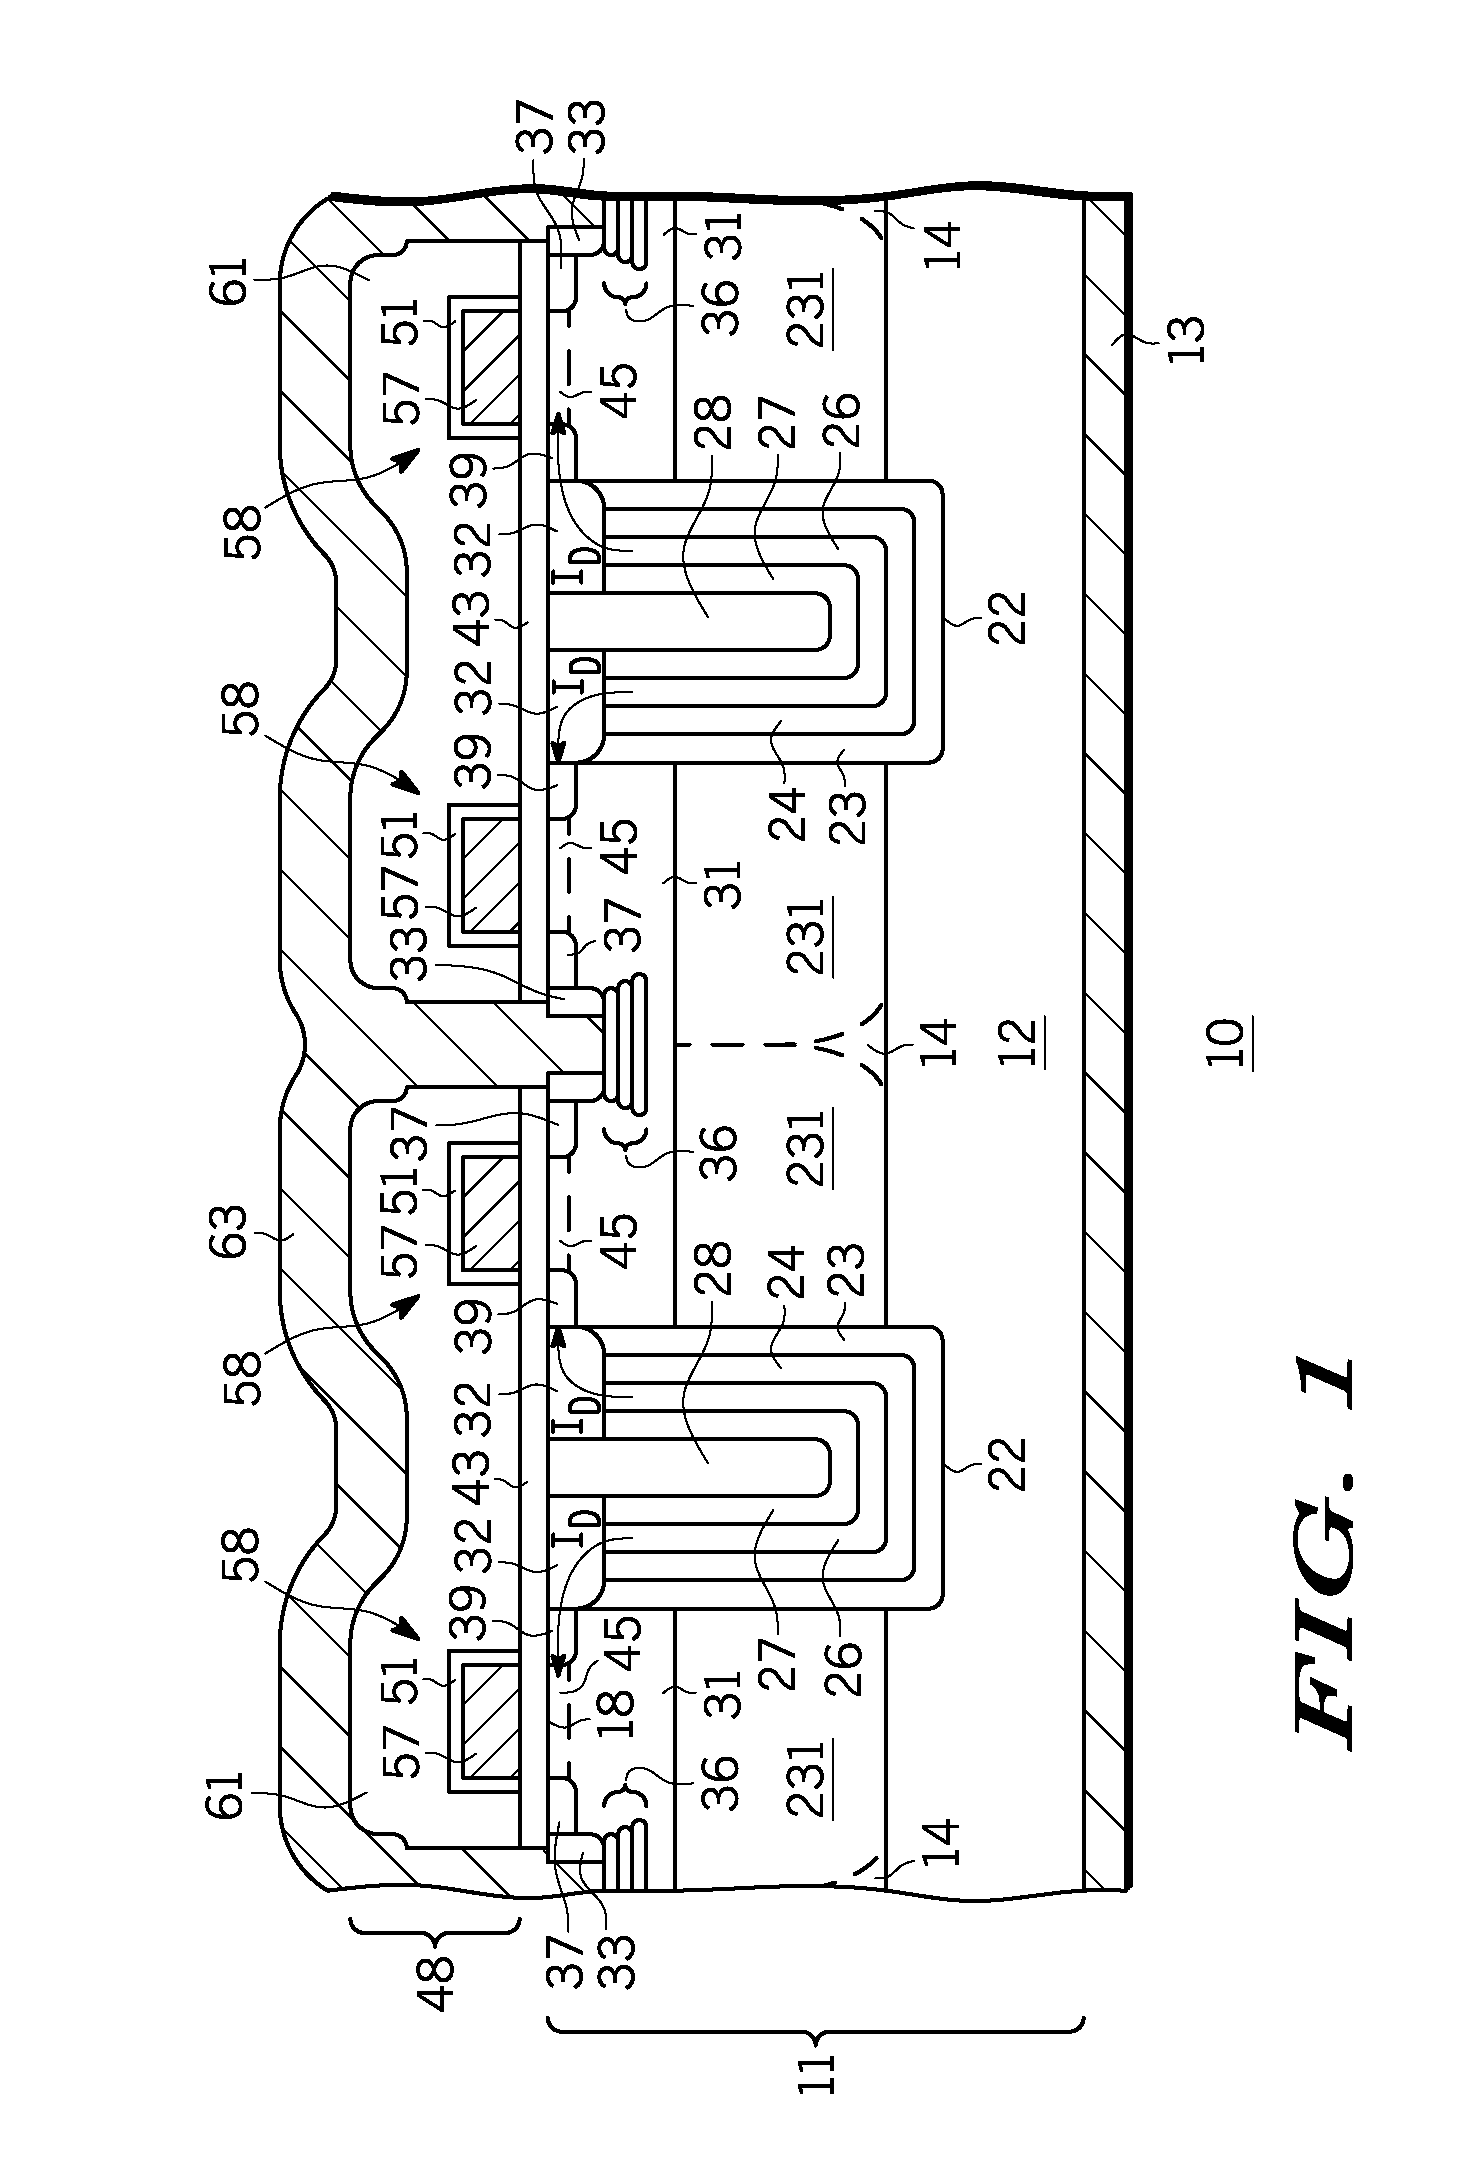 Method of forming a semiconductor device having trench charge compensation regions